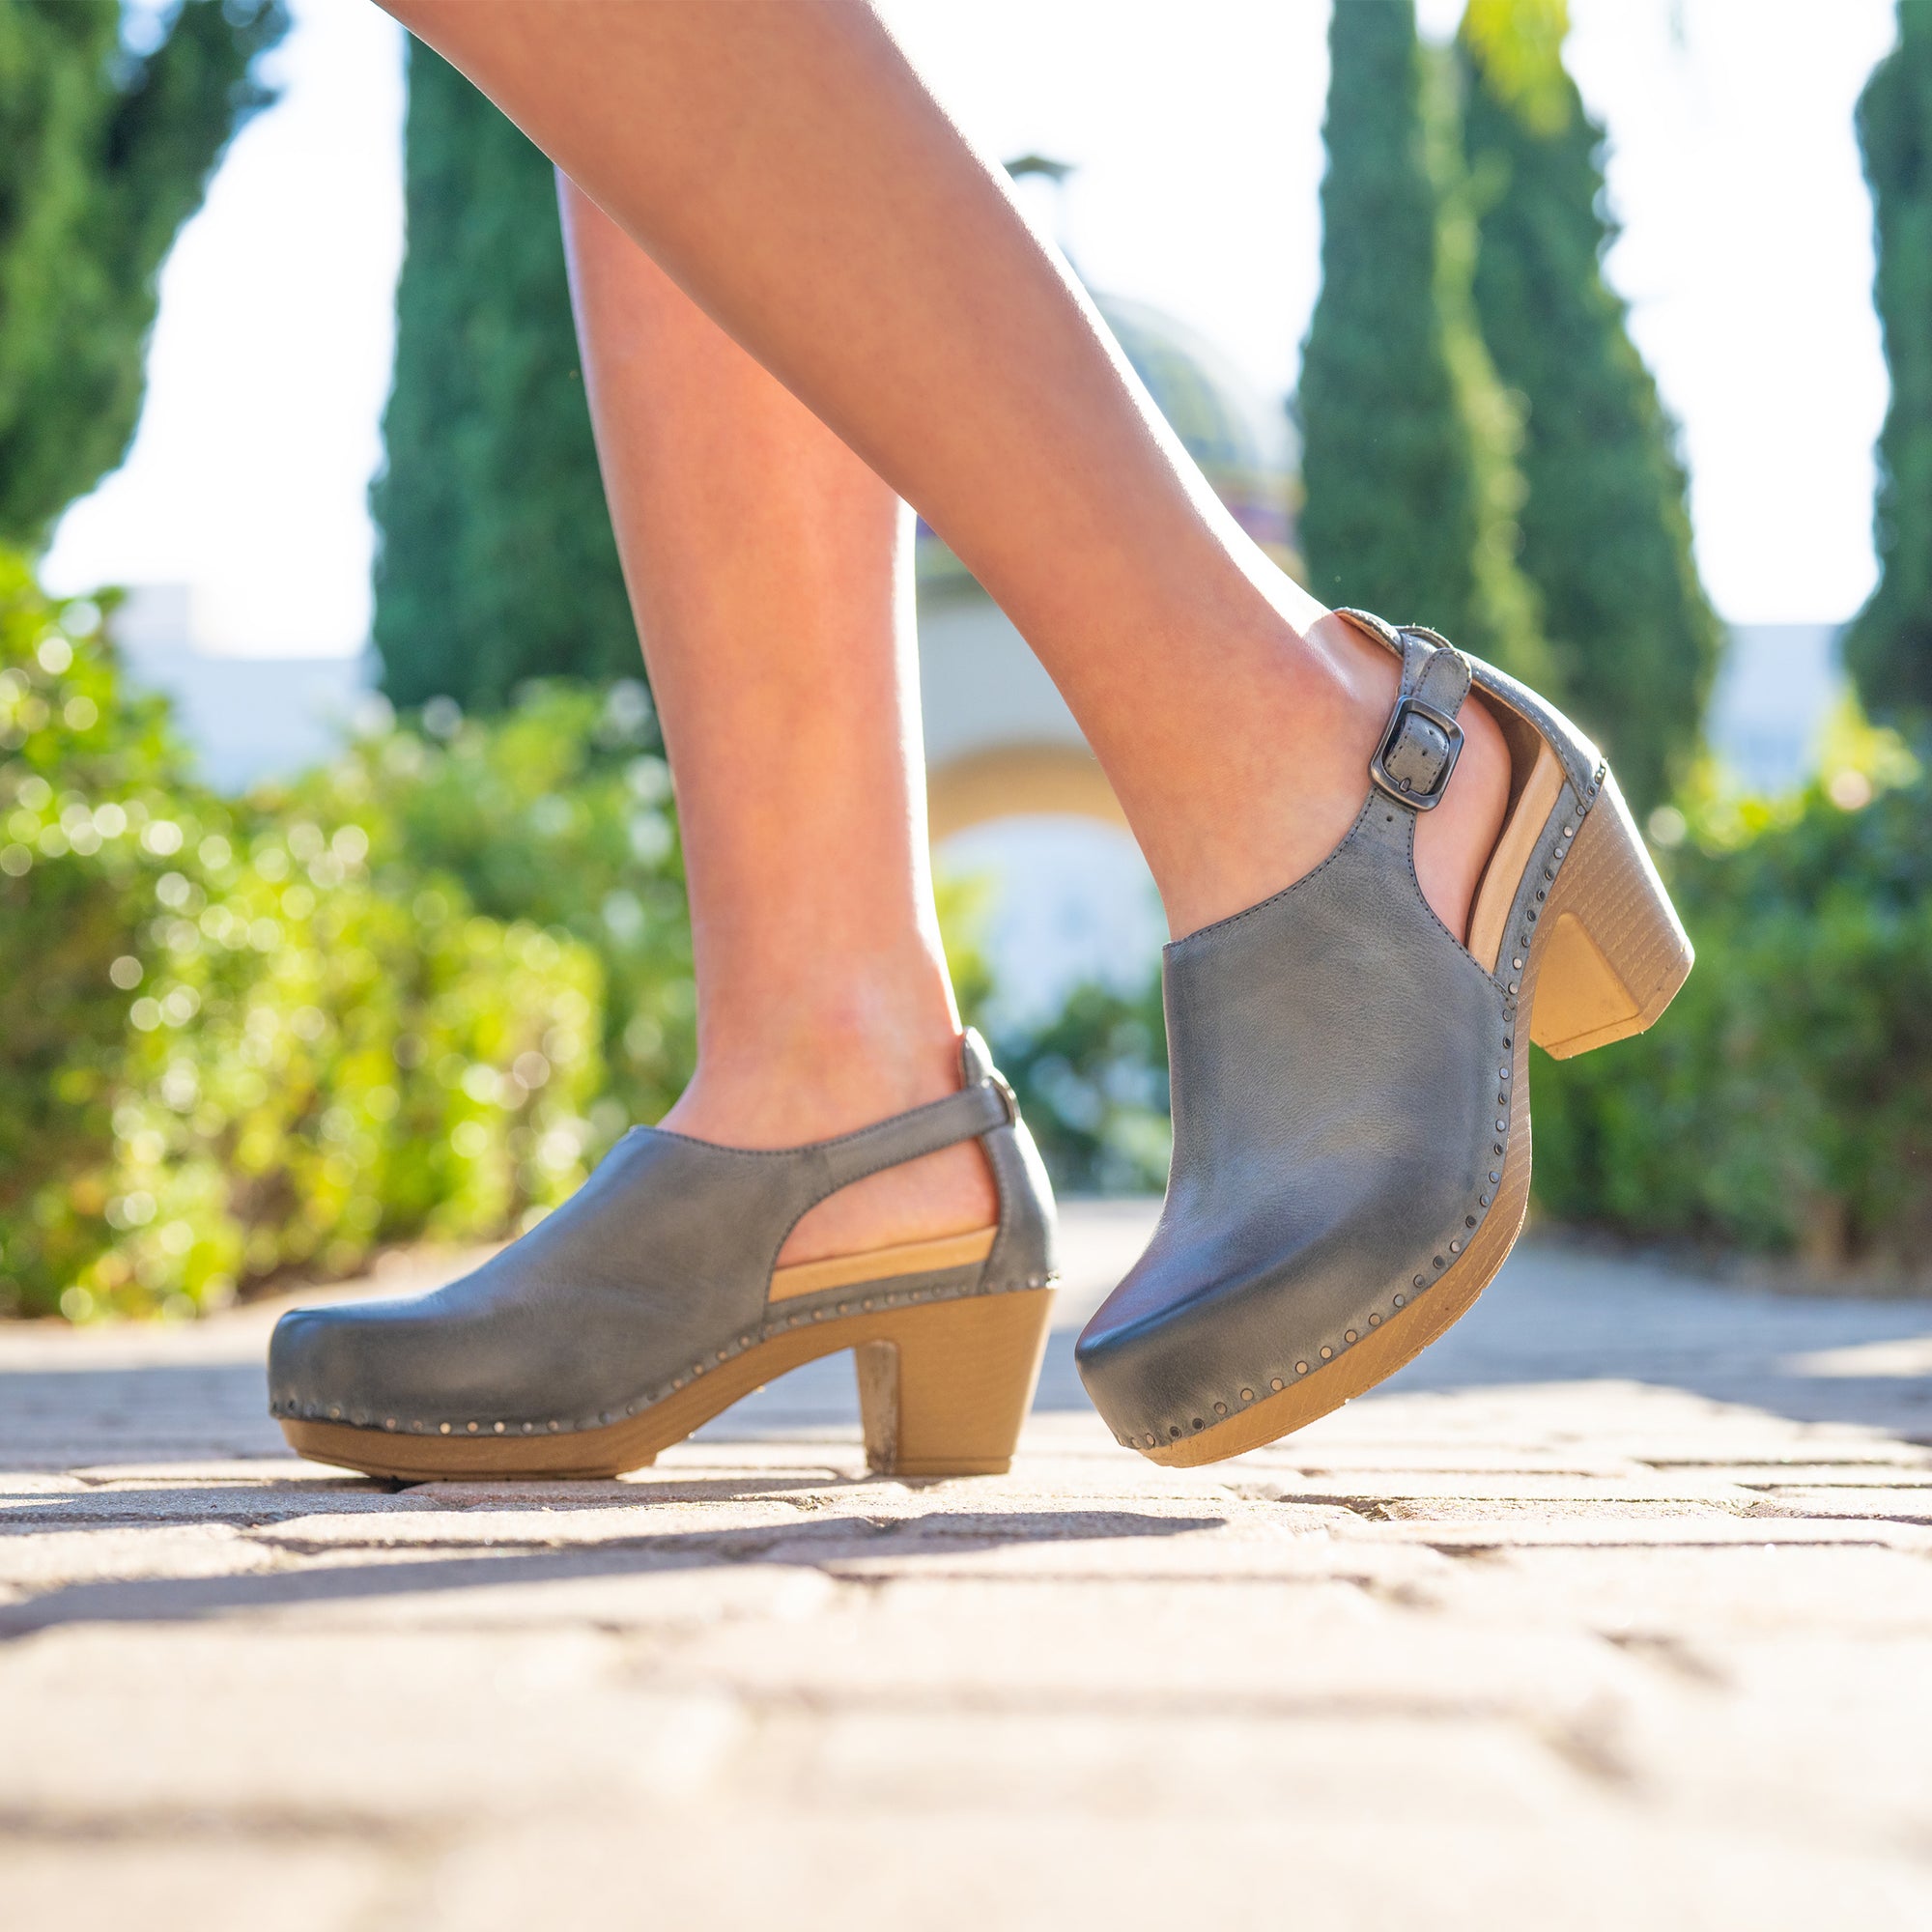 A closeup of light grey leather heels made with stylish nail-head construction shown on foot.